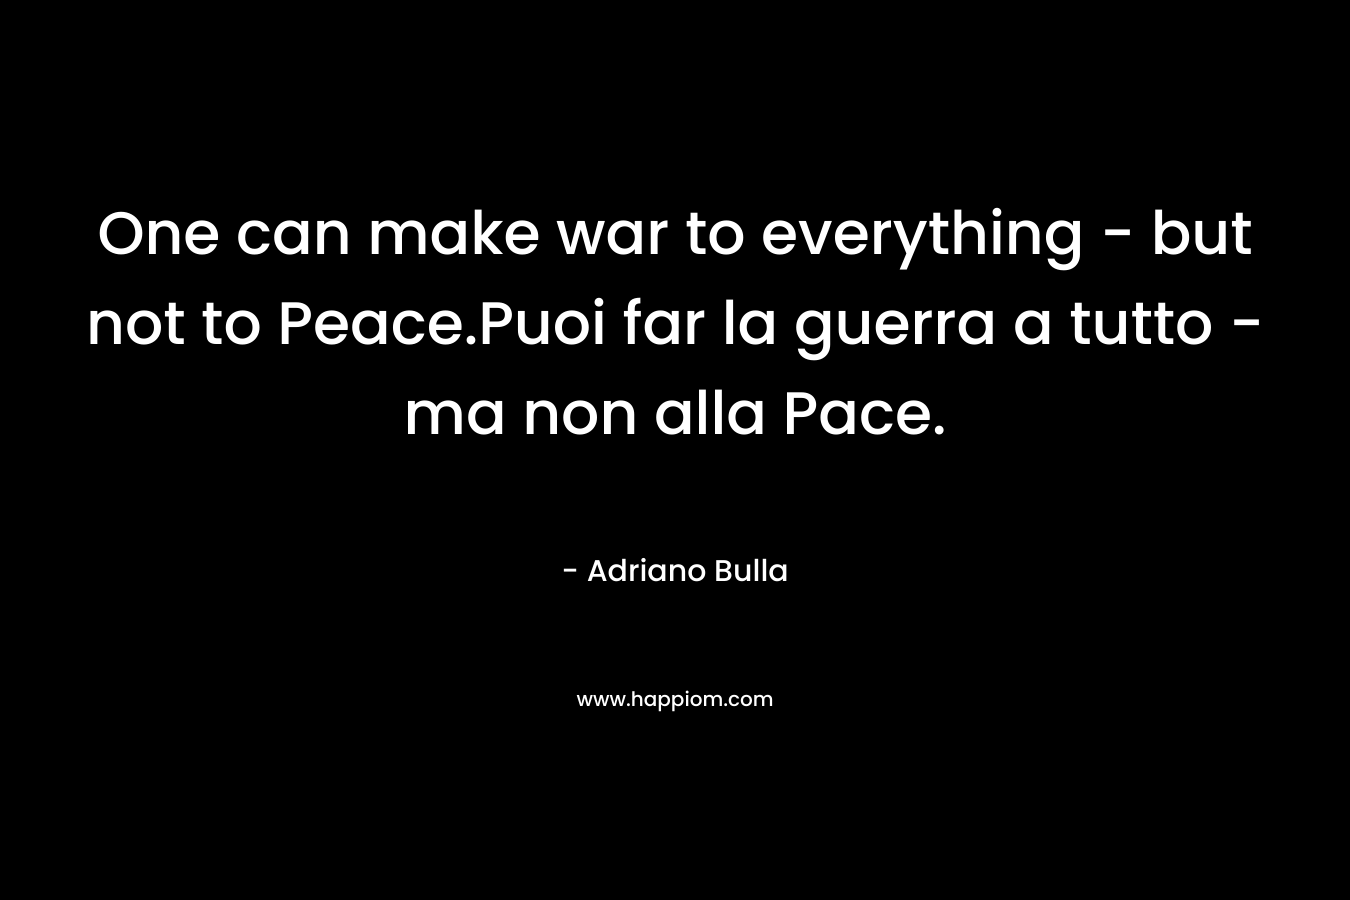 One can make war to everything - but not to Peace.Puoi far la guerra a tutto - ma non alla Pace.